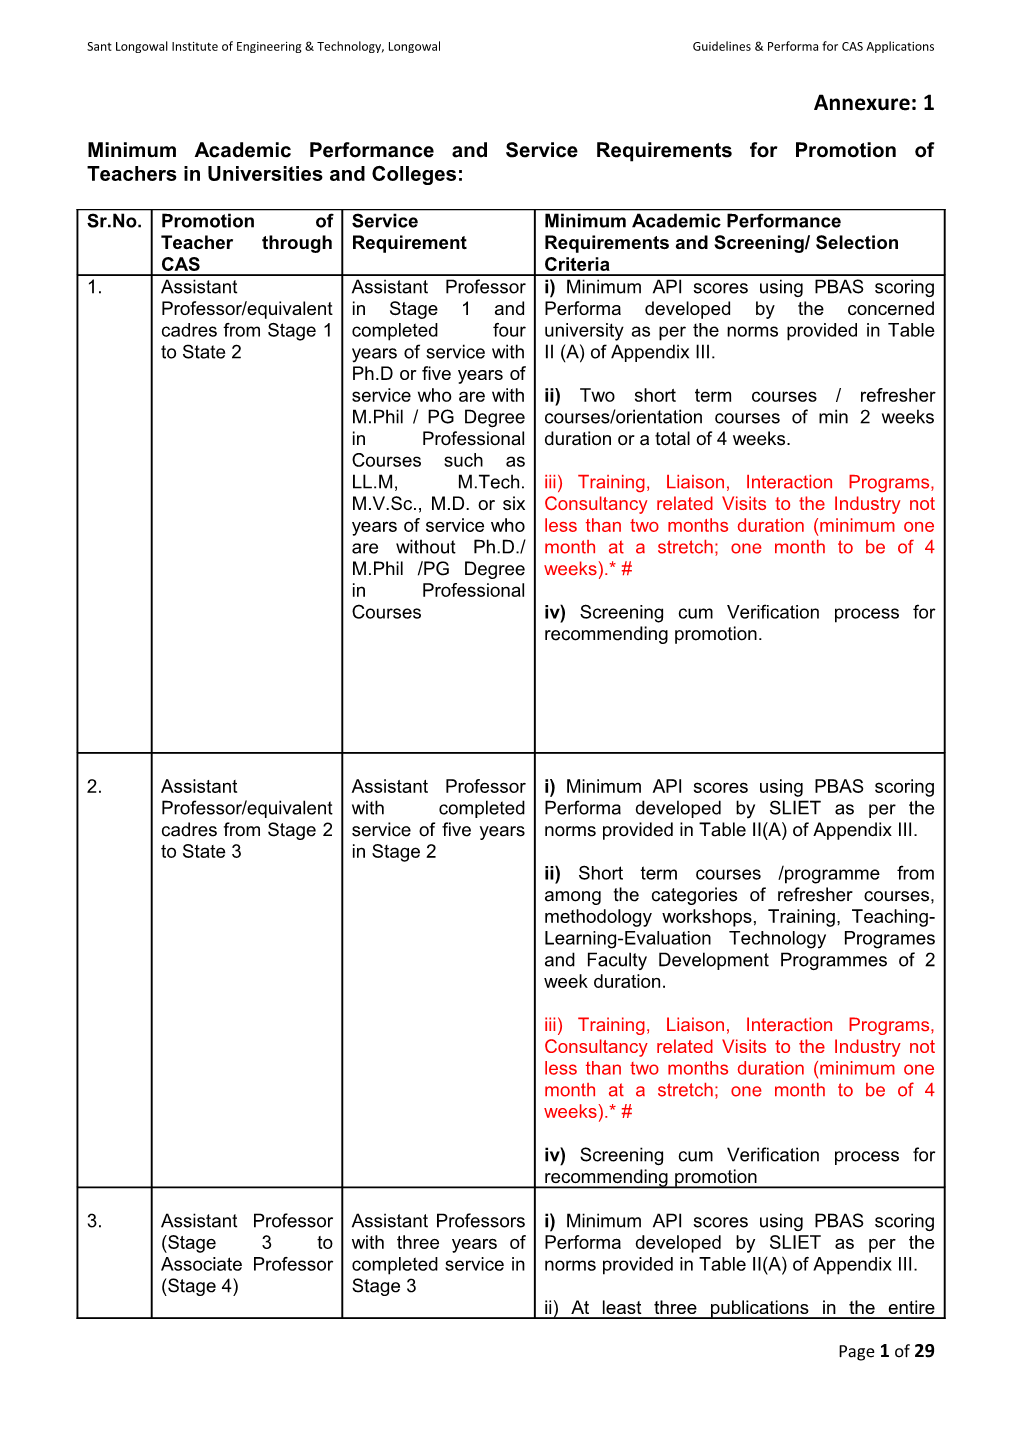 Sant Longowal Institute of Engineering & Technology, Longowalguidelines & Performa For